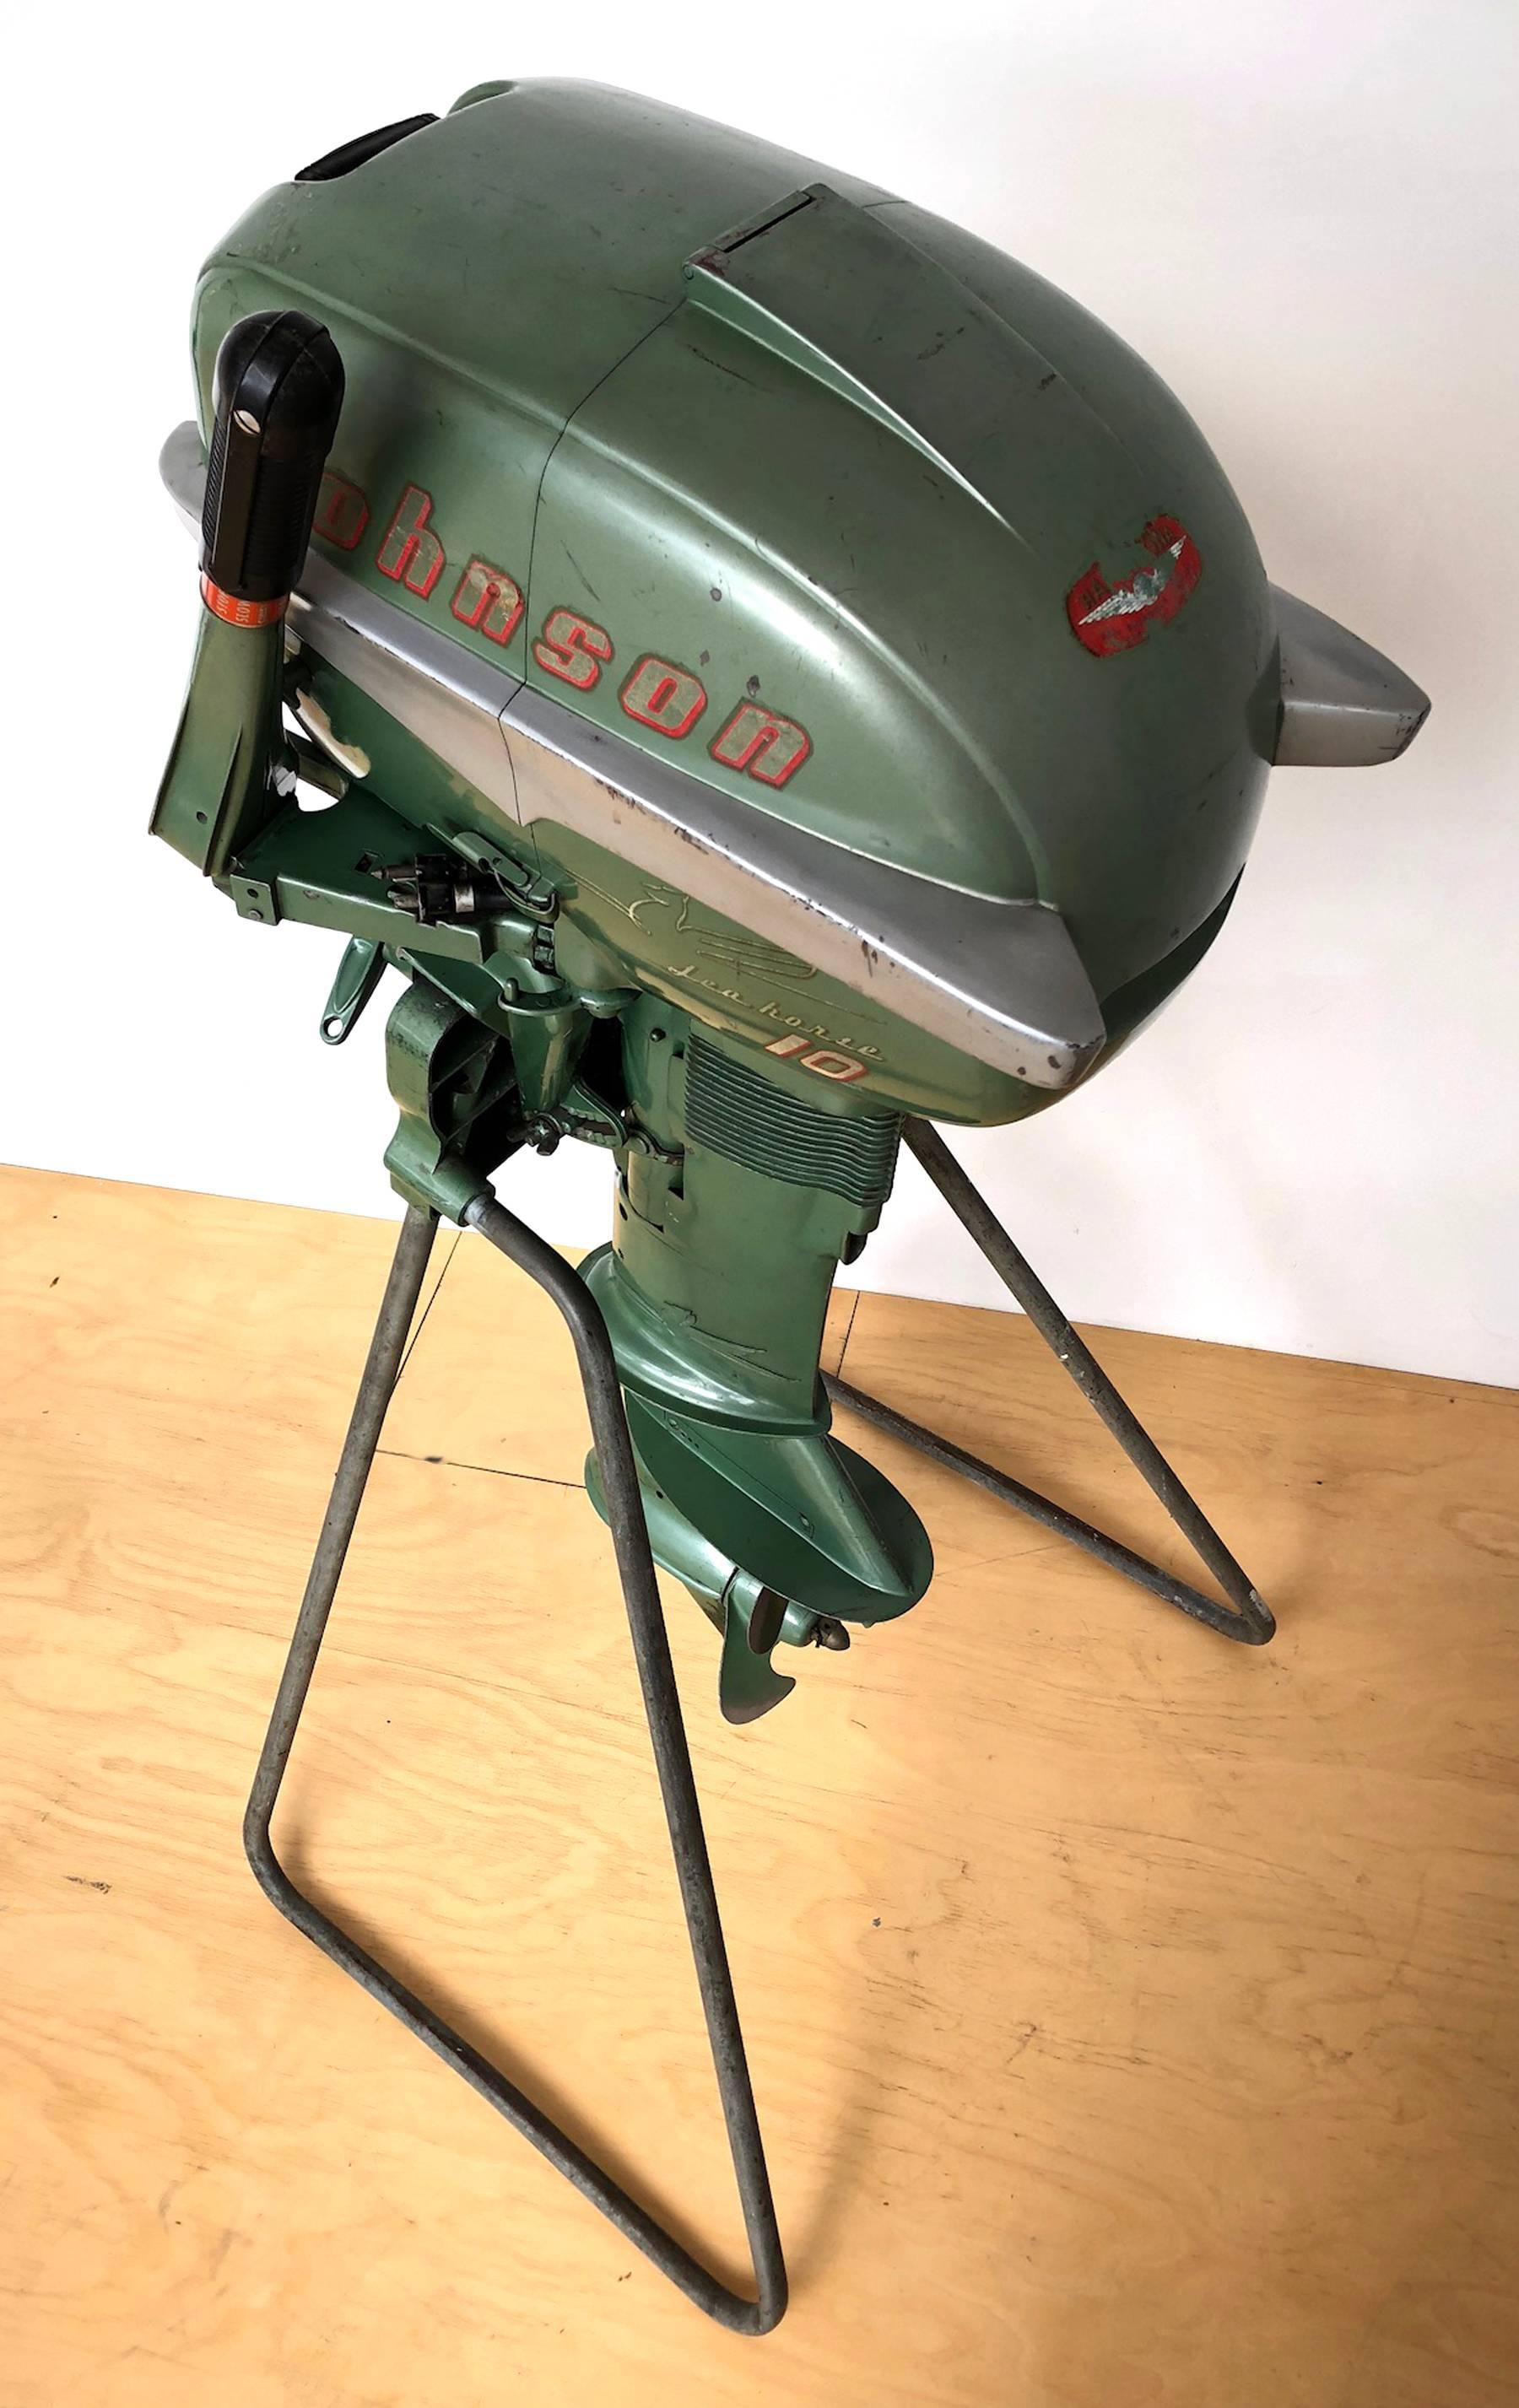 Johnson outboard motor from the 1950s. Johnson motor stand is included in the price. As shown mounted: 47.5